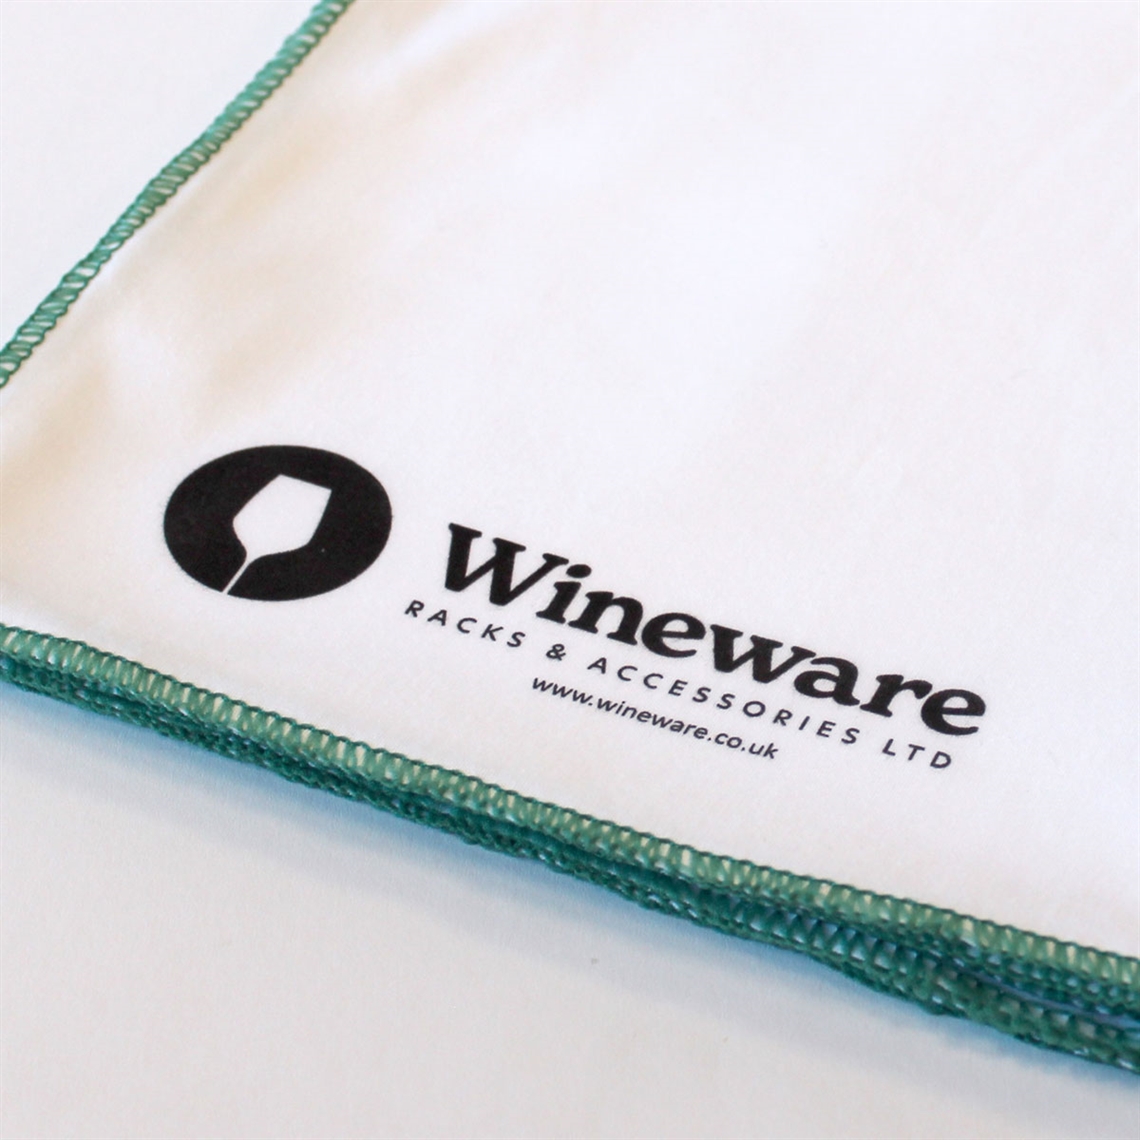 View more port accessories from our Wine Decanter Cleaning range